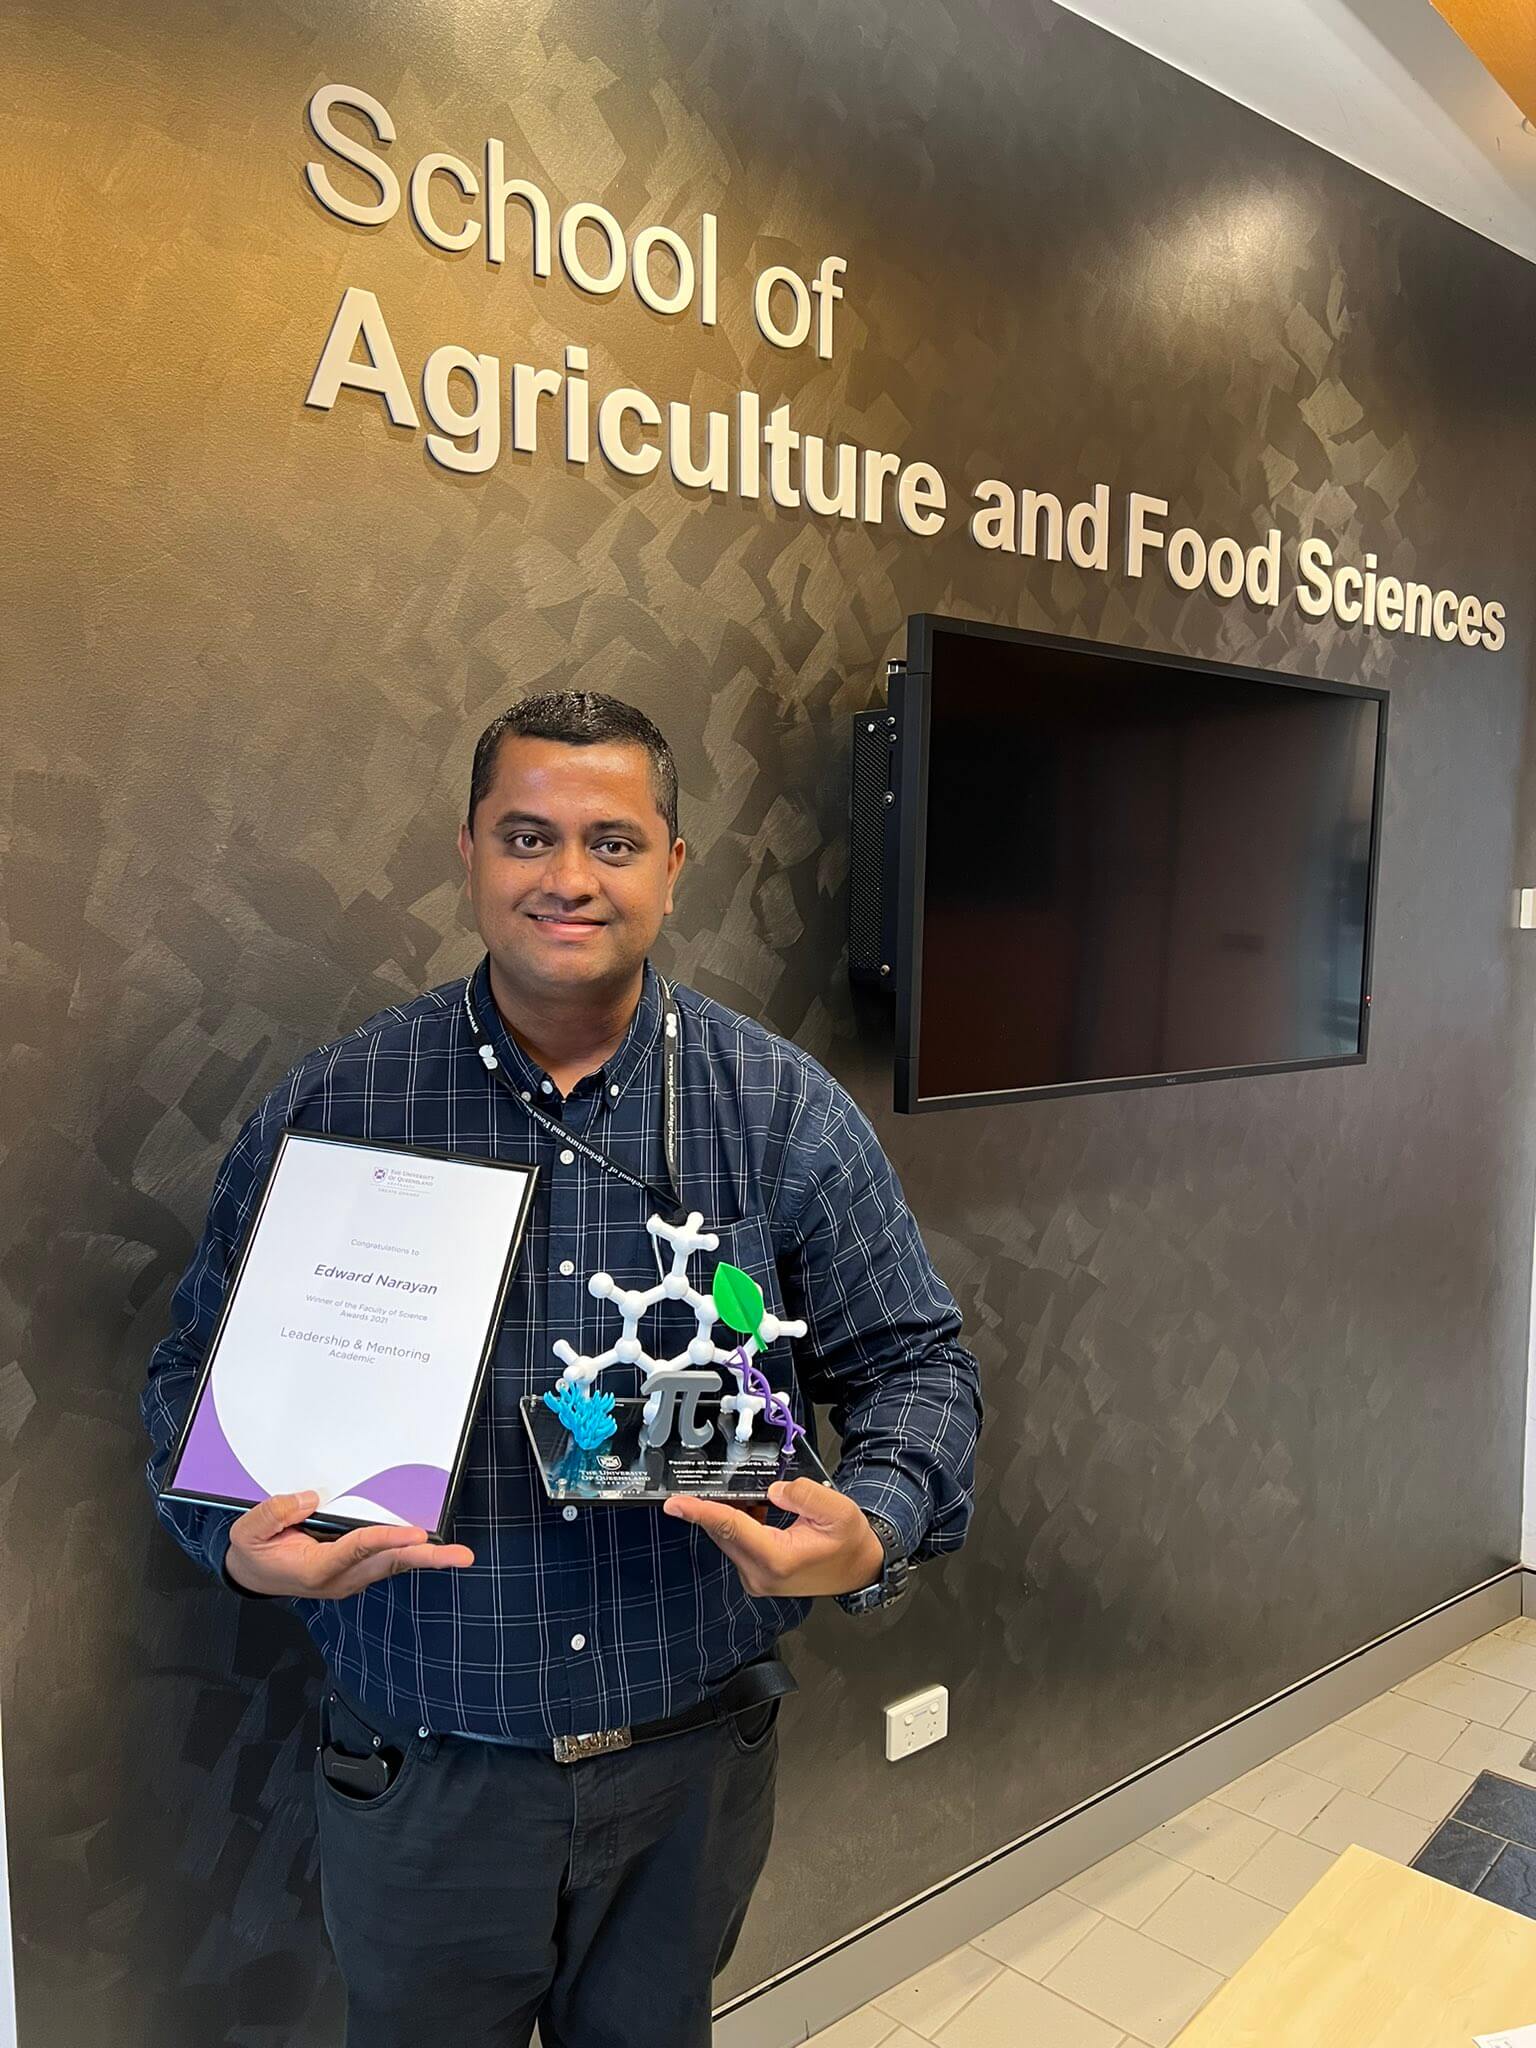 A photo of Dr. Edward Narayan with his UQ Science Award for Leadership & Mentoring . He is standing in front of a sign on the wall saying "School of Agriculture and Food Sciences".